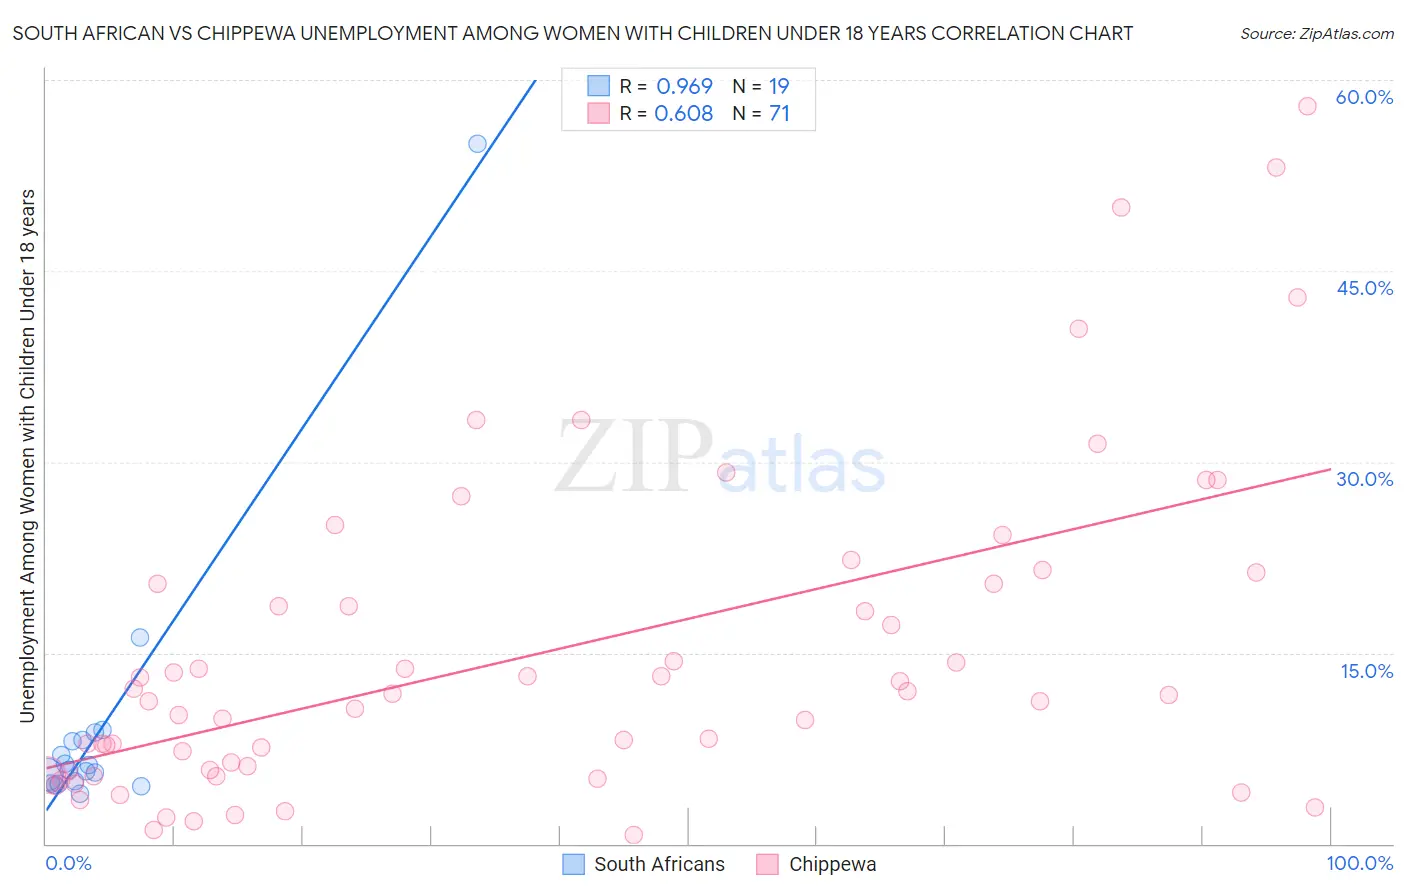 South African vs Chippewa Unemployment Among Women with Children Under 18 years